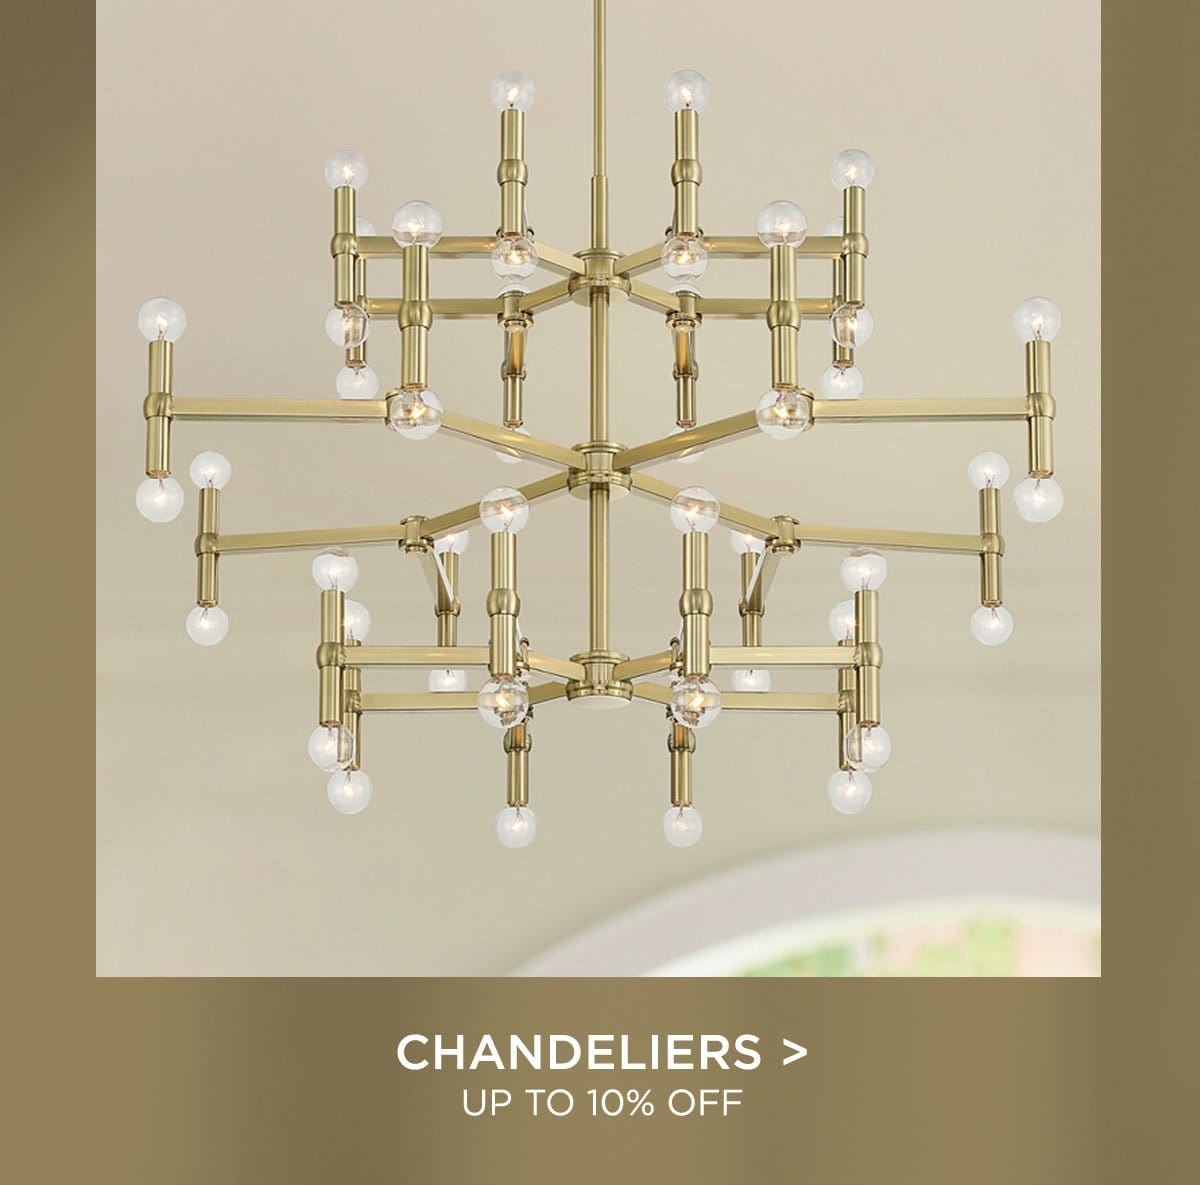 Chandeliers > Up to 10% Off